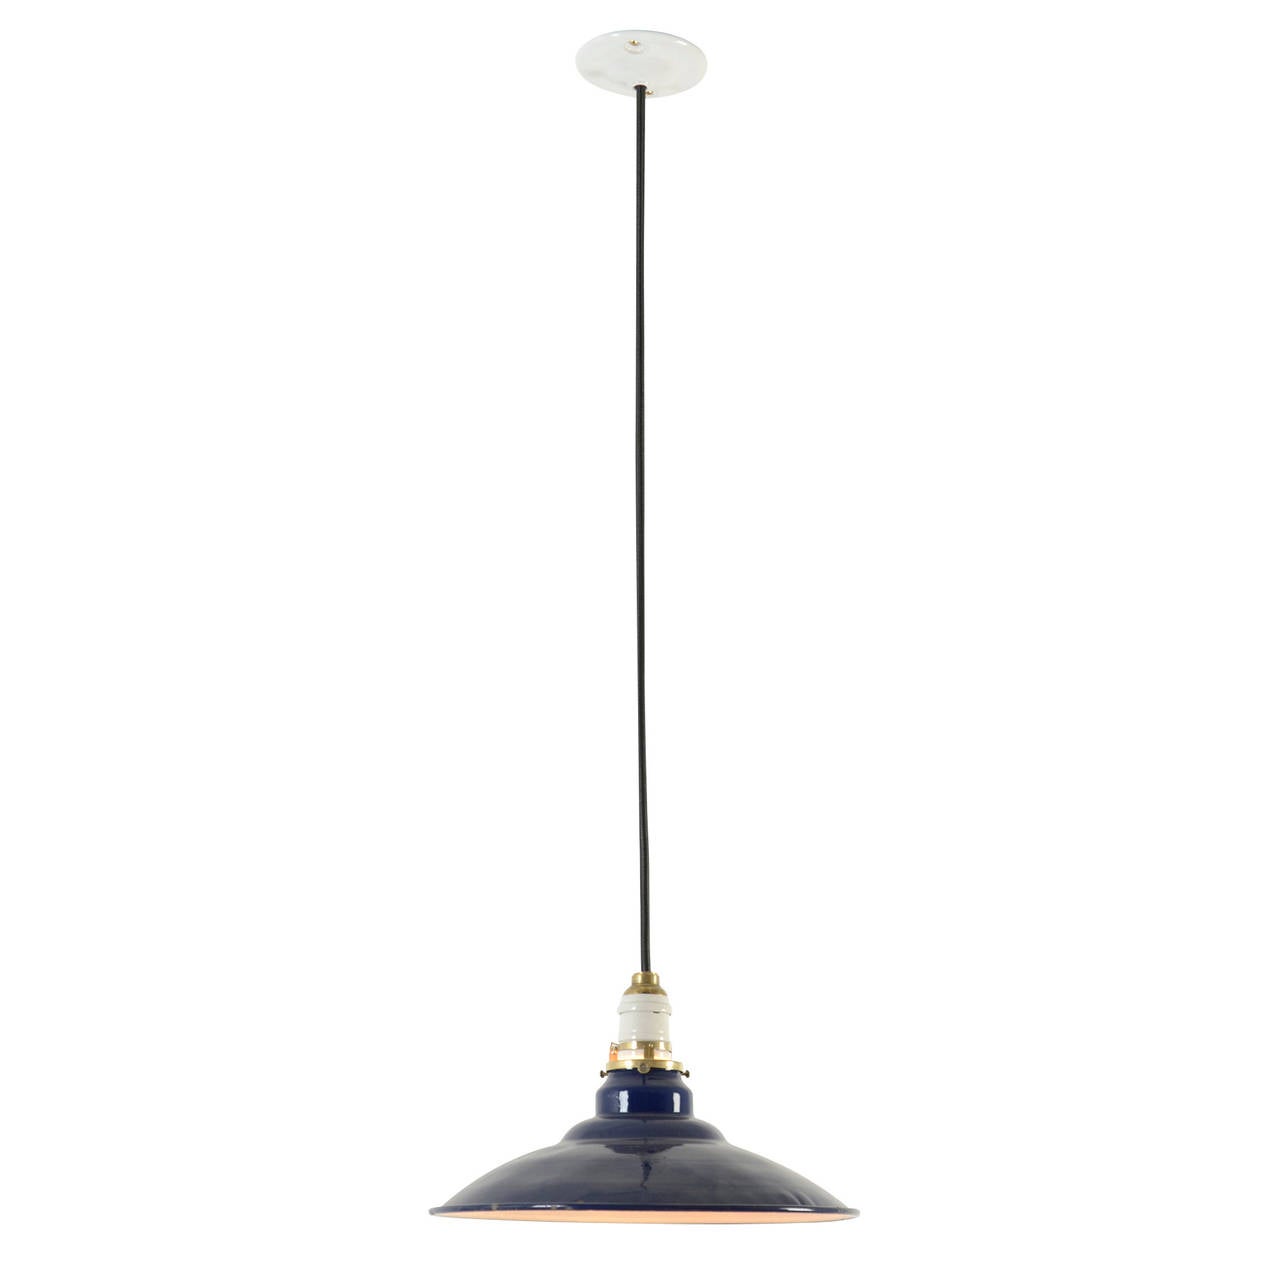 This nice pendant marries a white porcelain socket with a 12